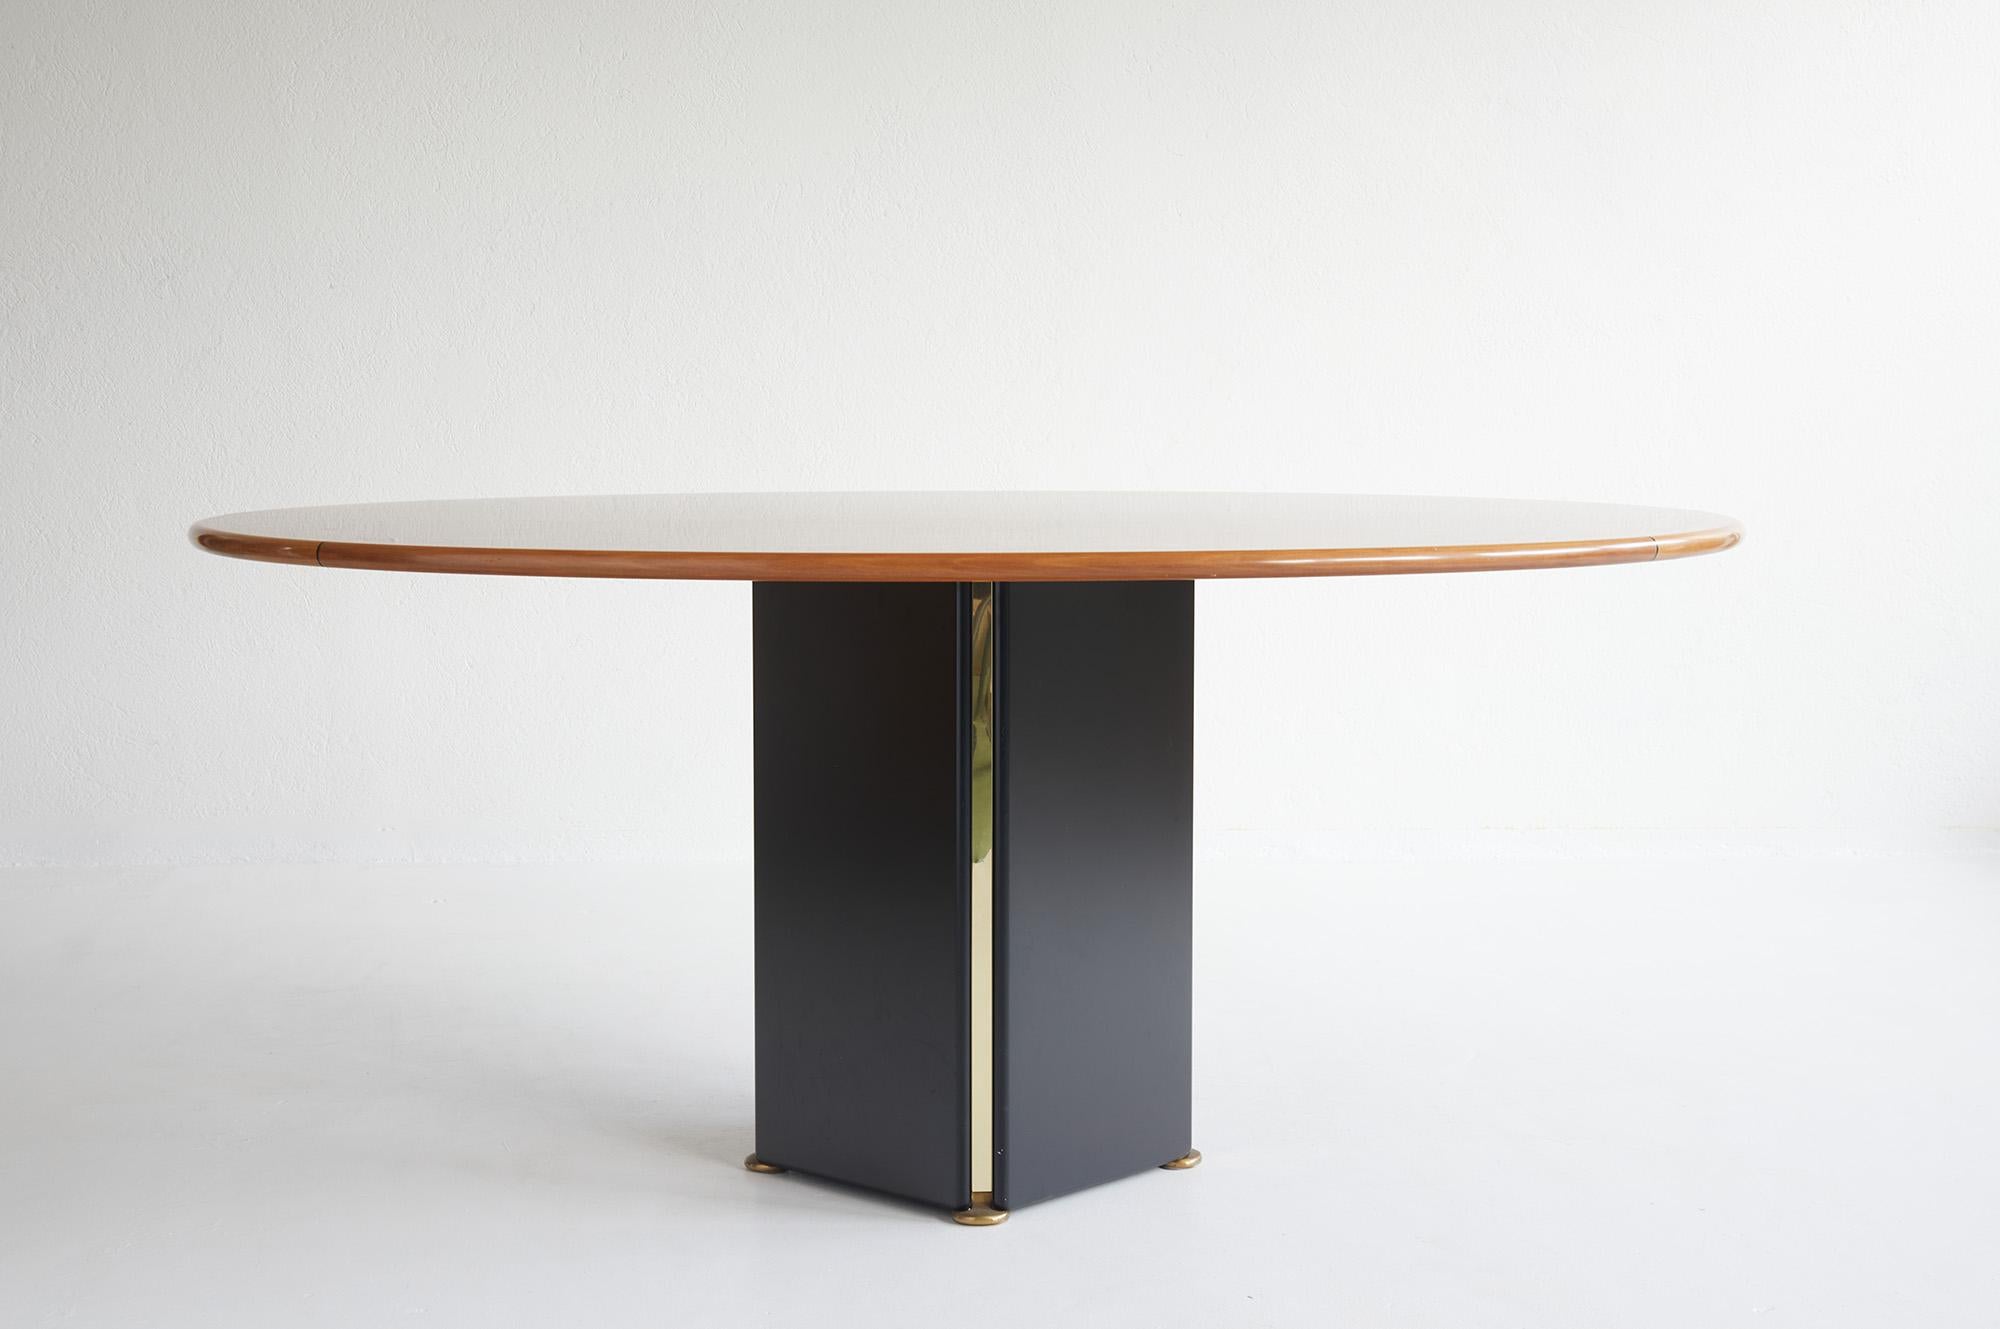 Afra & Tobia Scarpa for Maxalto 'Artona' Large Oval Dining Table in Walnut, Brass Italy 1975

Afra & Tobia Scarpa for Maxalto 'Artona' Large Oval Dining Table in Walnut, Brass Italy 1975

The 'Artona' oval dining table stands as a gorgeous furniture